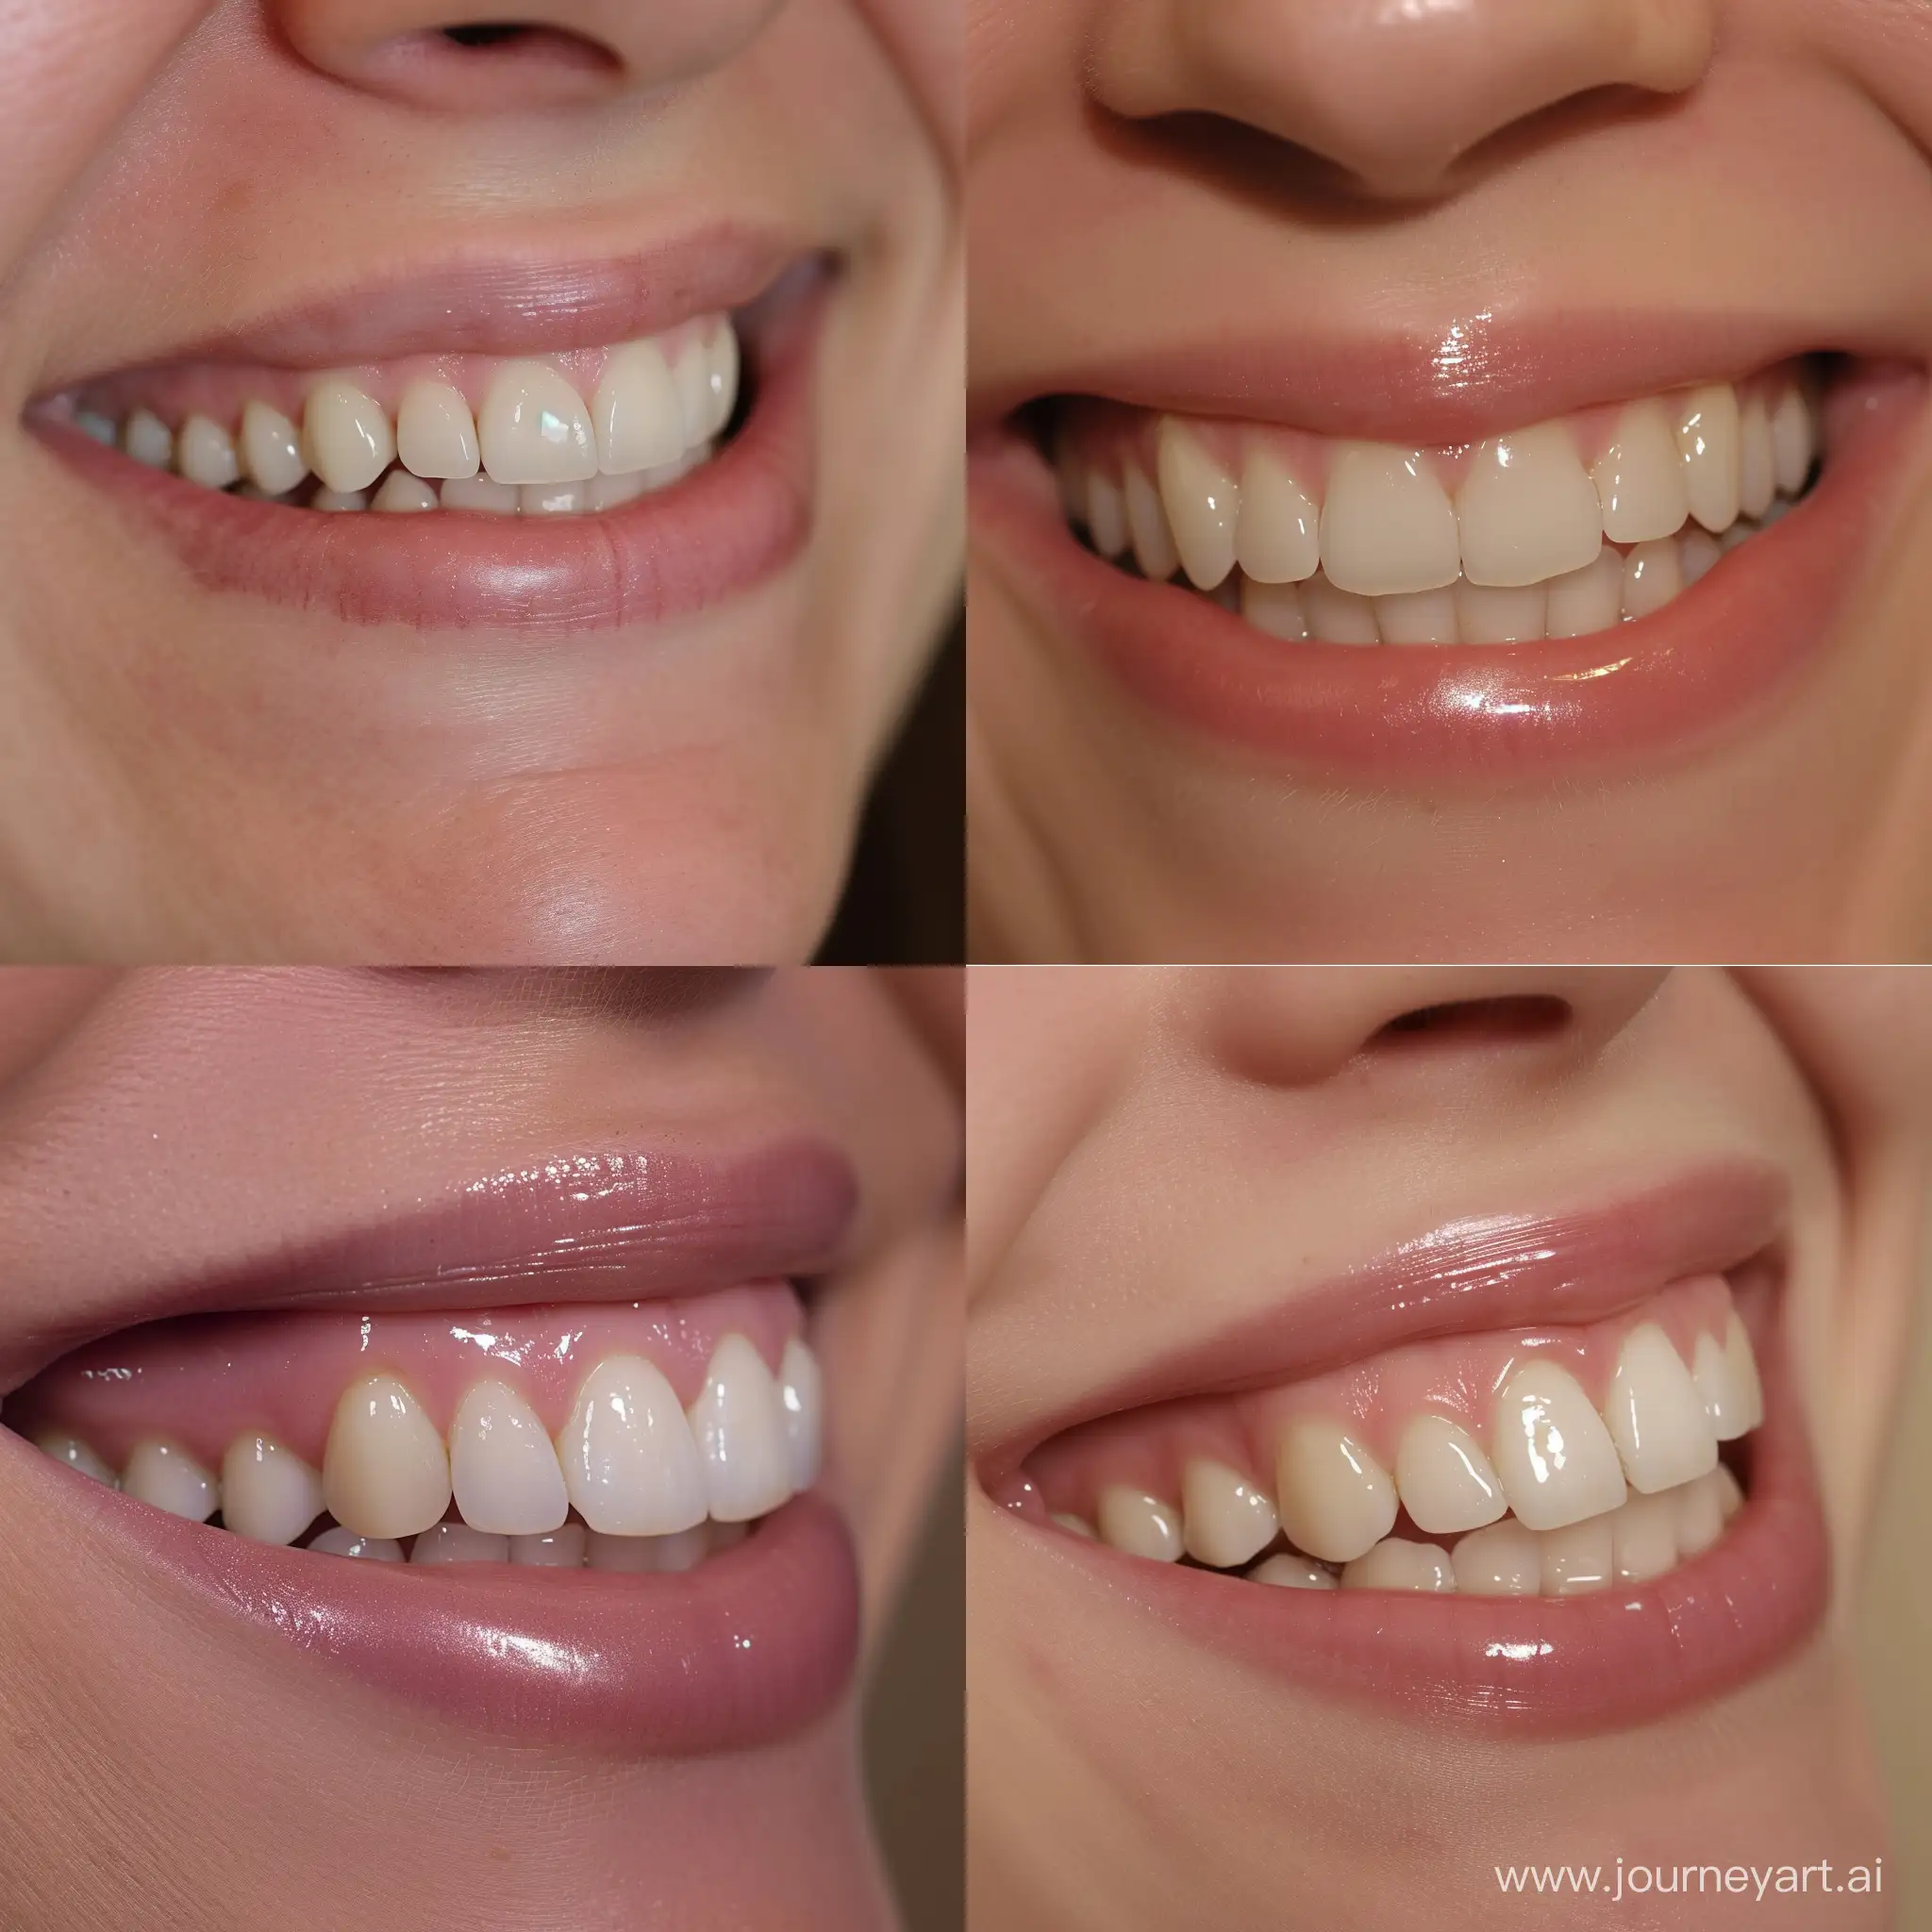 close-up of a person's smile before and after undergoing dental implants